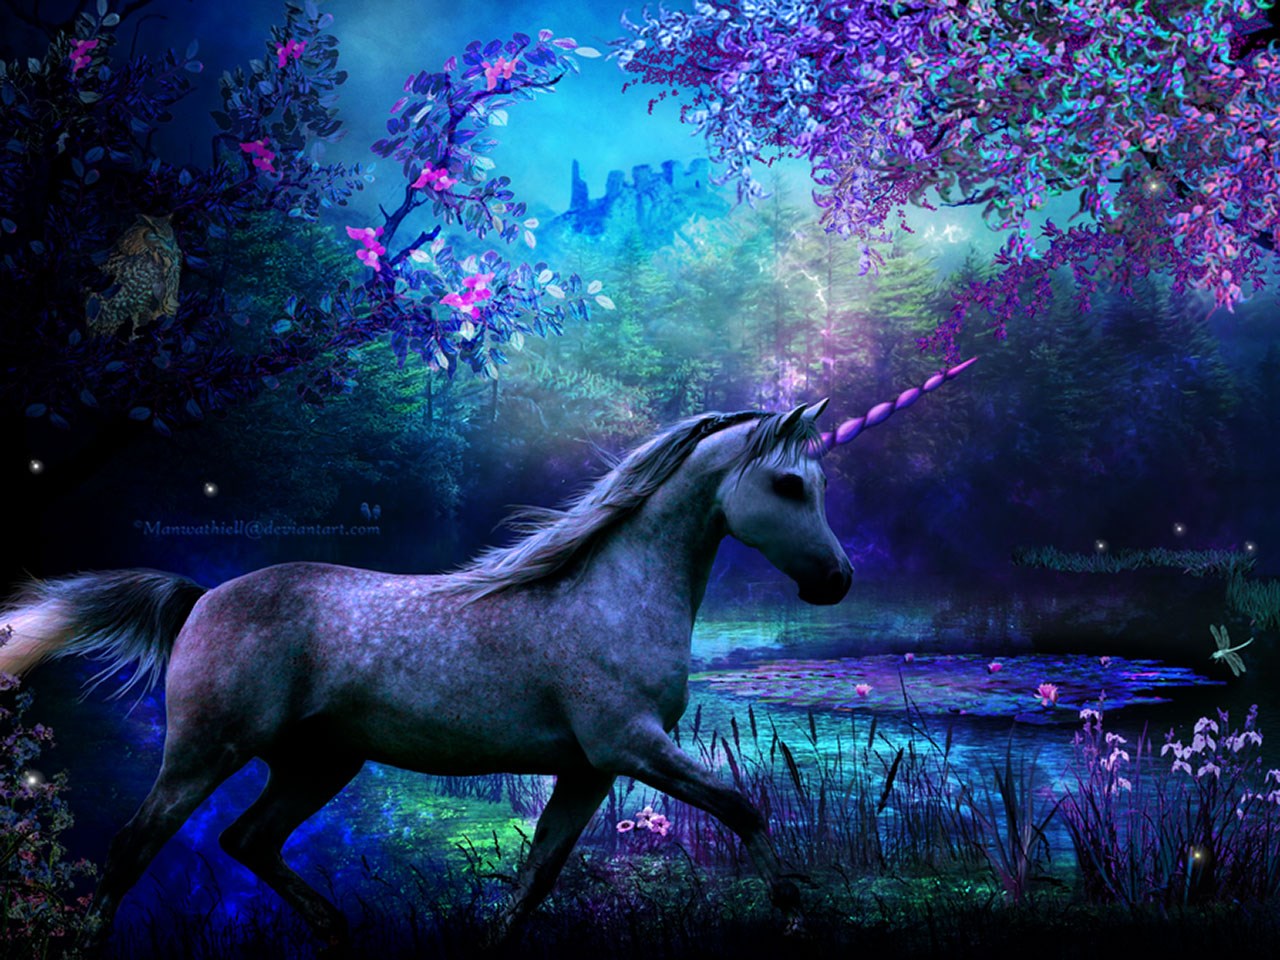 Free screensaver wallpapers for unicorn